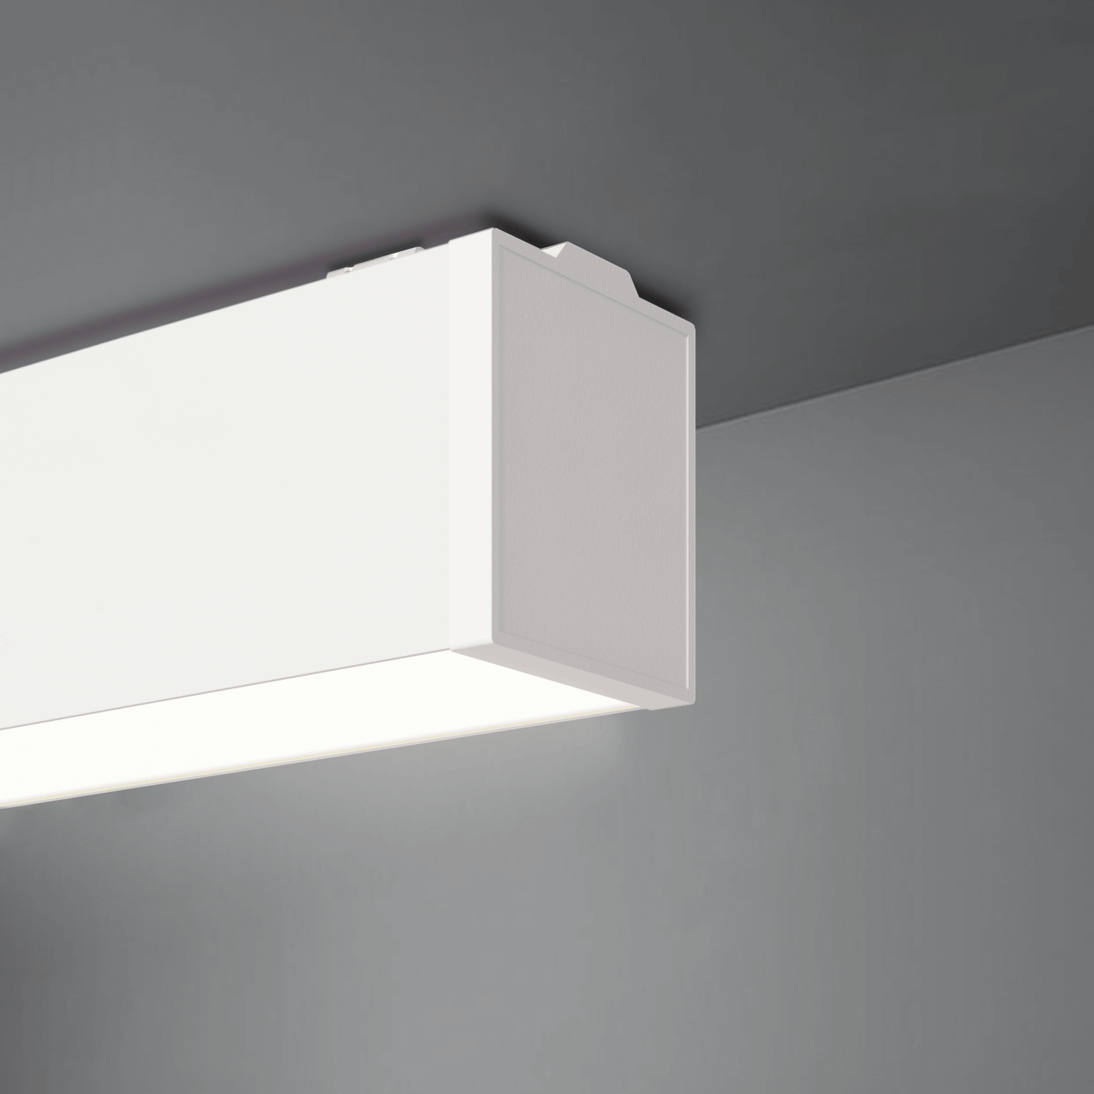 The 12100-35-S LED Surface Mounted Linear Ceiling Light is IP66 and wet-location rated, making it qualified for use in most commercial kitchens.